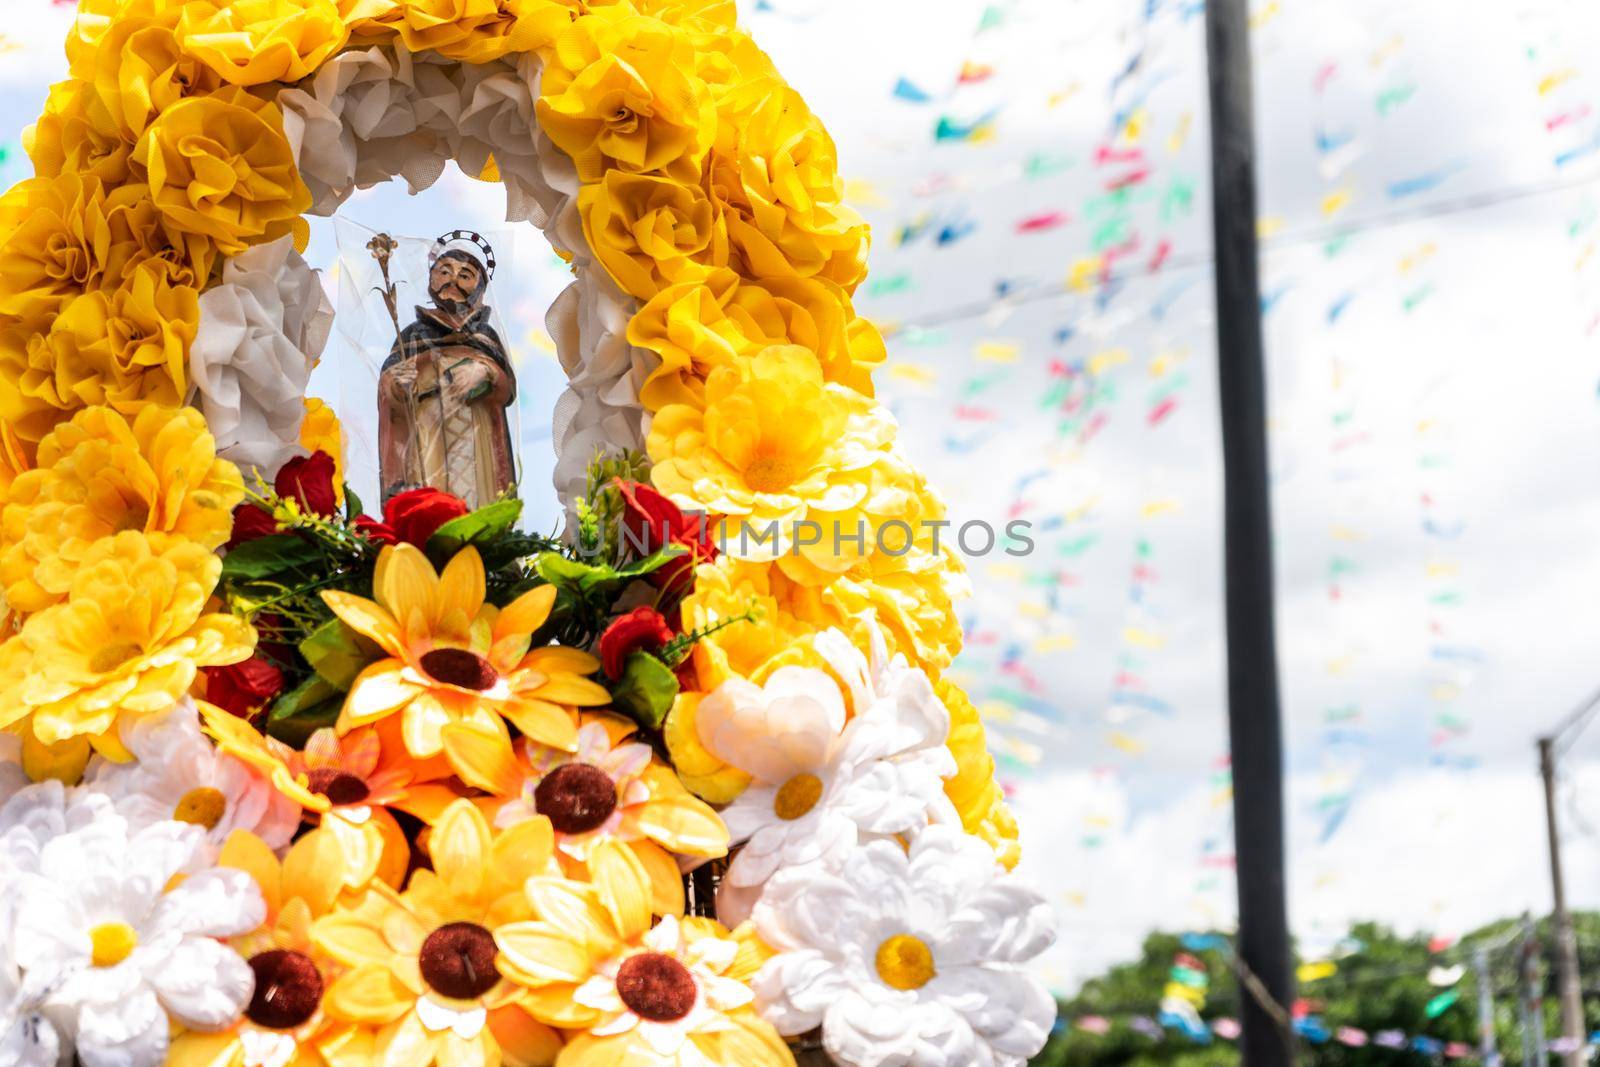 Image of Santo Domingo being carried on an altar adorned with flowers by cfalvarez